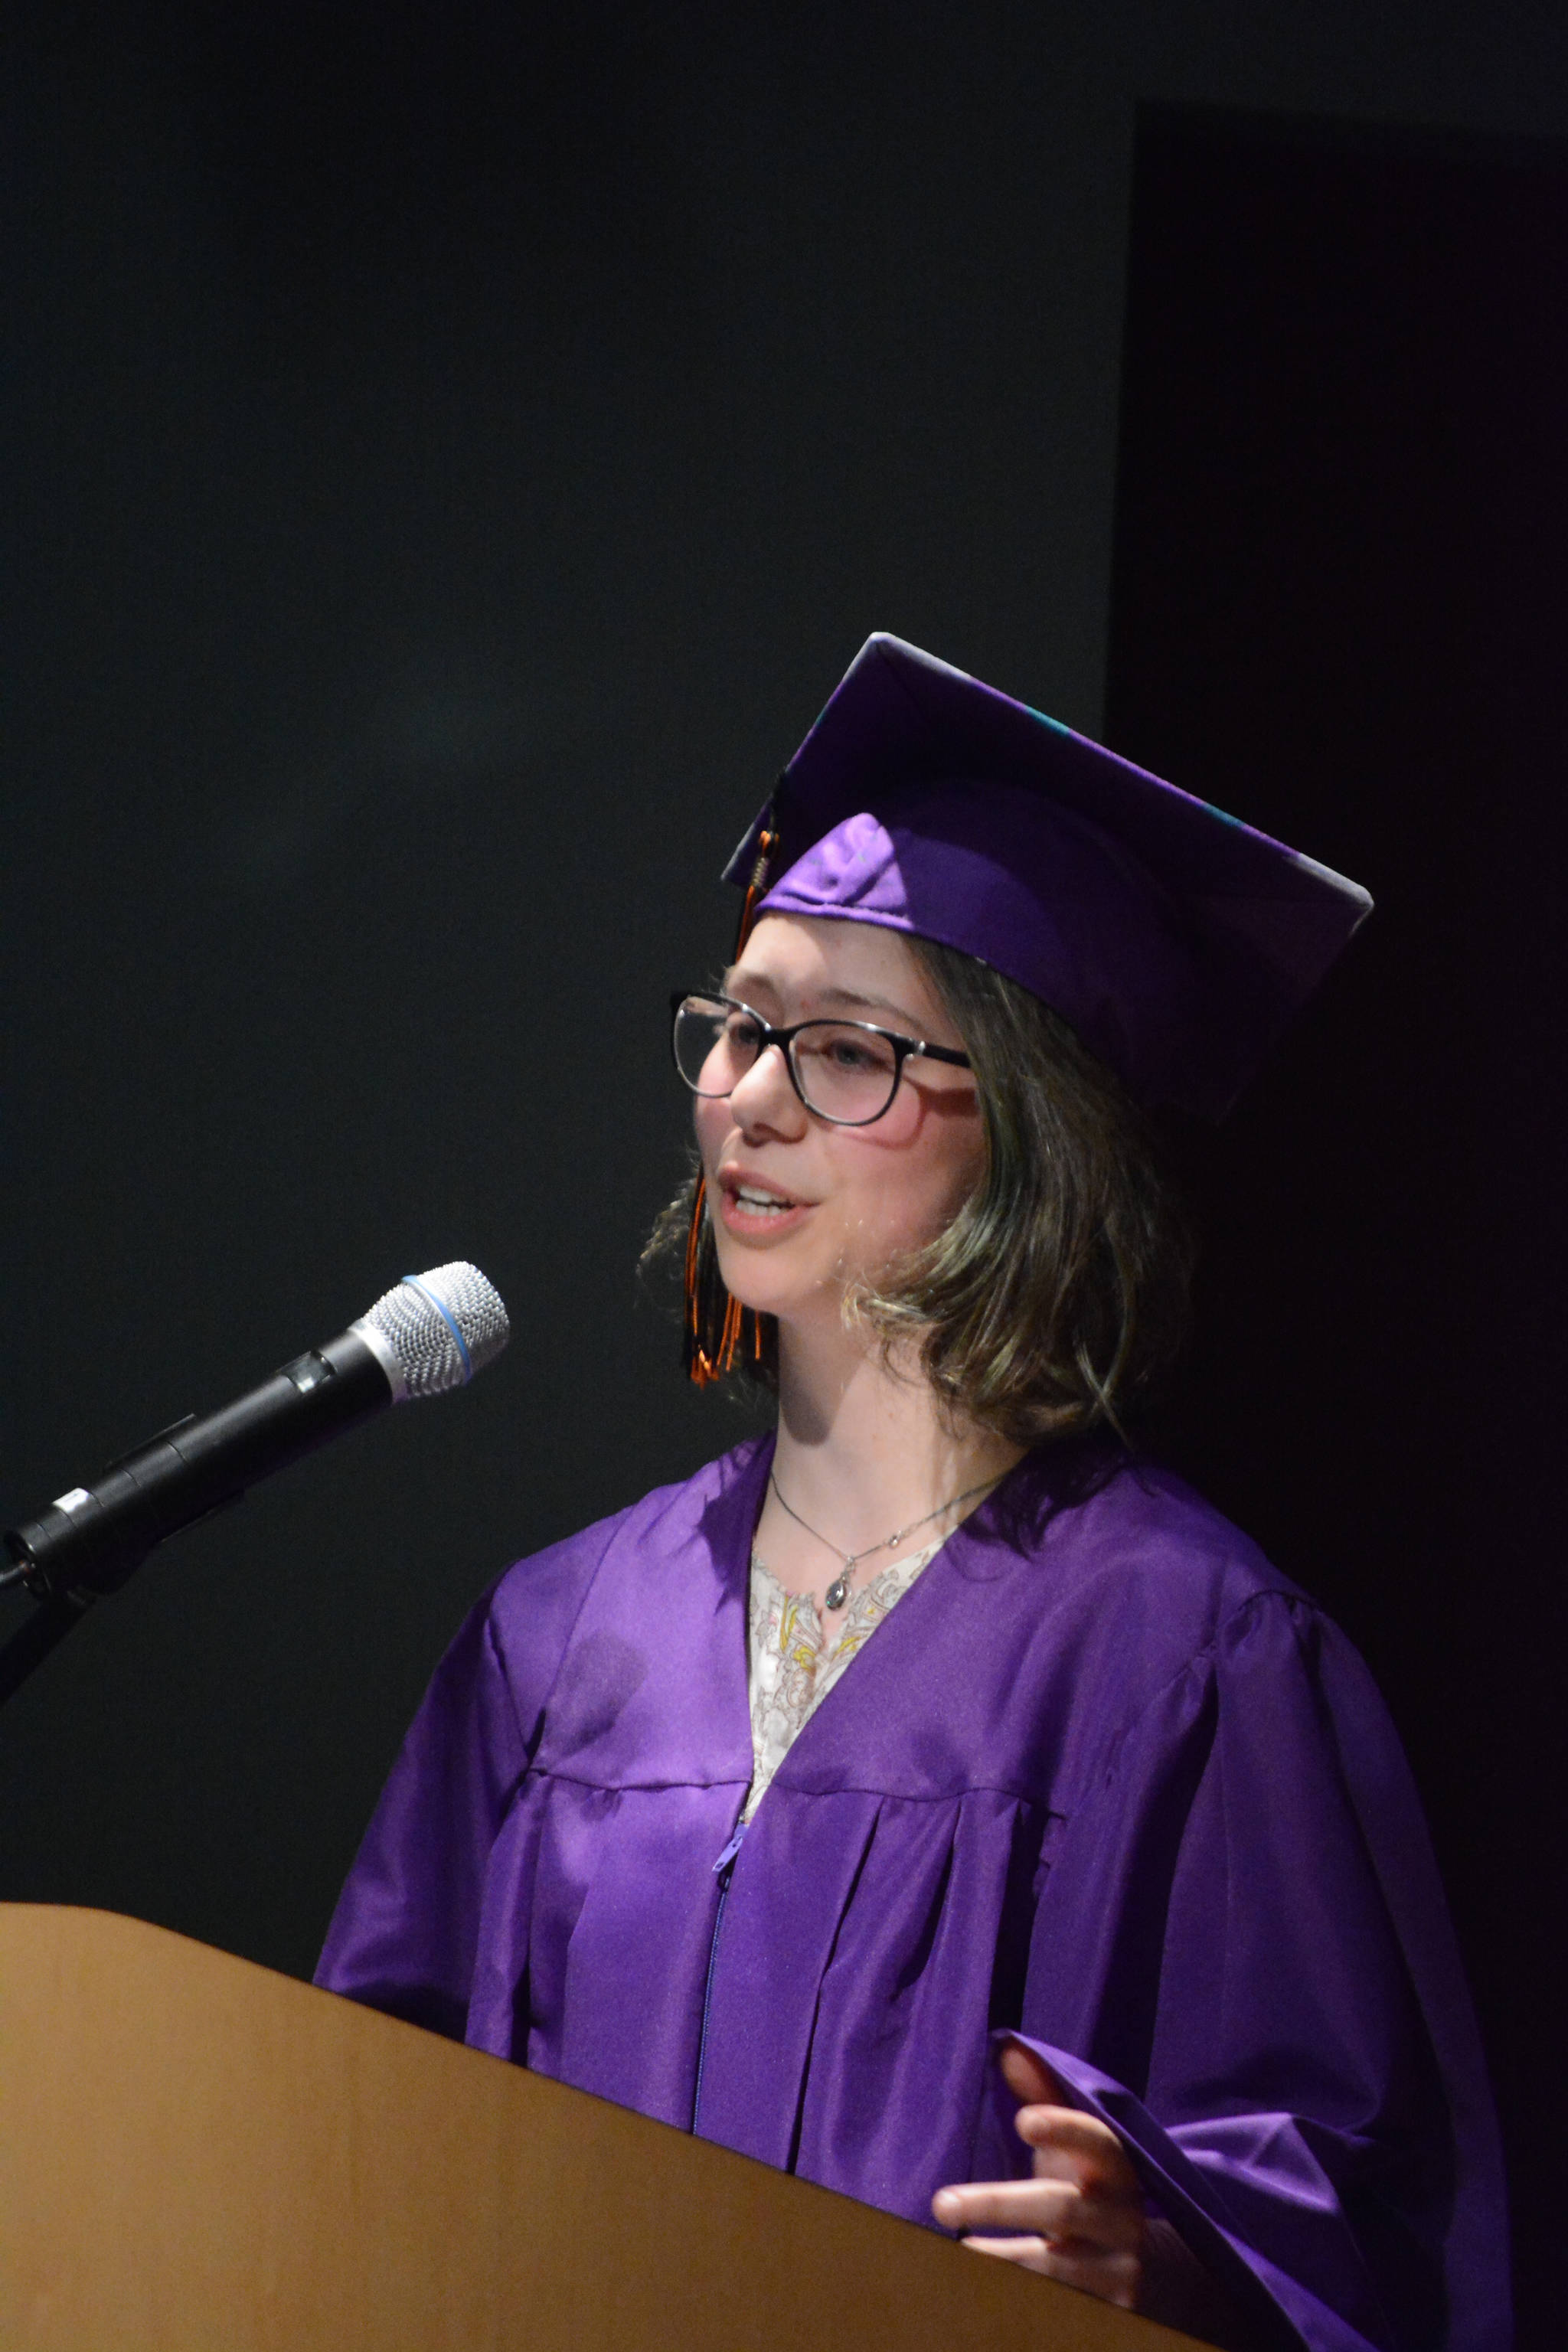 Flex High School graduate Zoe Cramer gives a speech thanking family, friends, teachers and staff, Cramer said, “Mistakes don’t have to be a downfall. They are the soil from which we grow.” Nine students graduated from Flex on Tuesday night, May 22, 2018, at the Alaska Islands and Ocean Visitor Center auditorium, Homer, Alaska. (Photo by Michael Armstrong / Homer News)